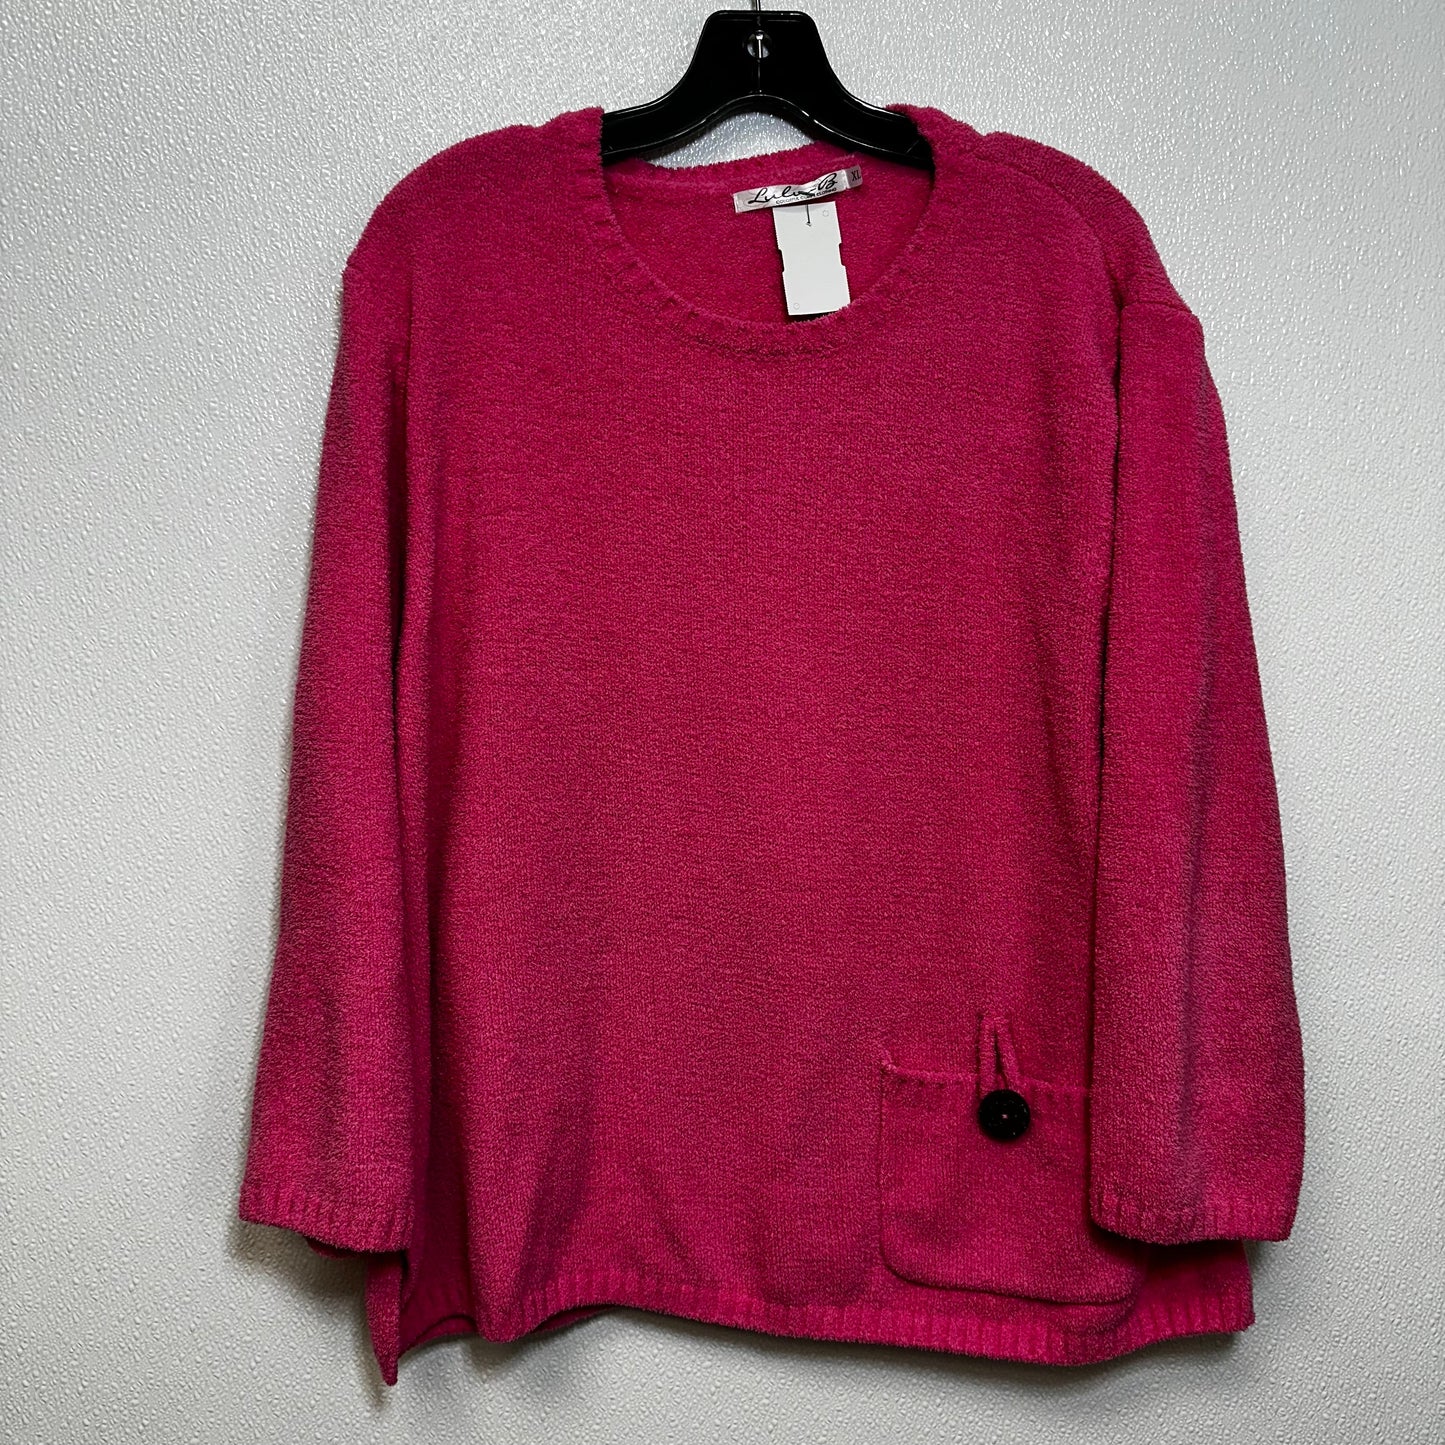 Hot Pink Sweater Clothes Mentor, Size Xl